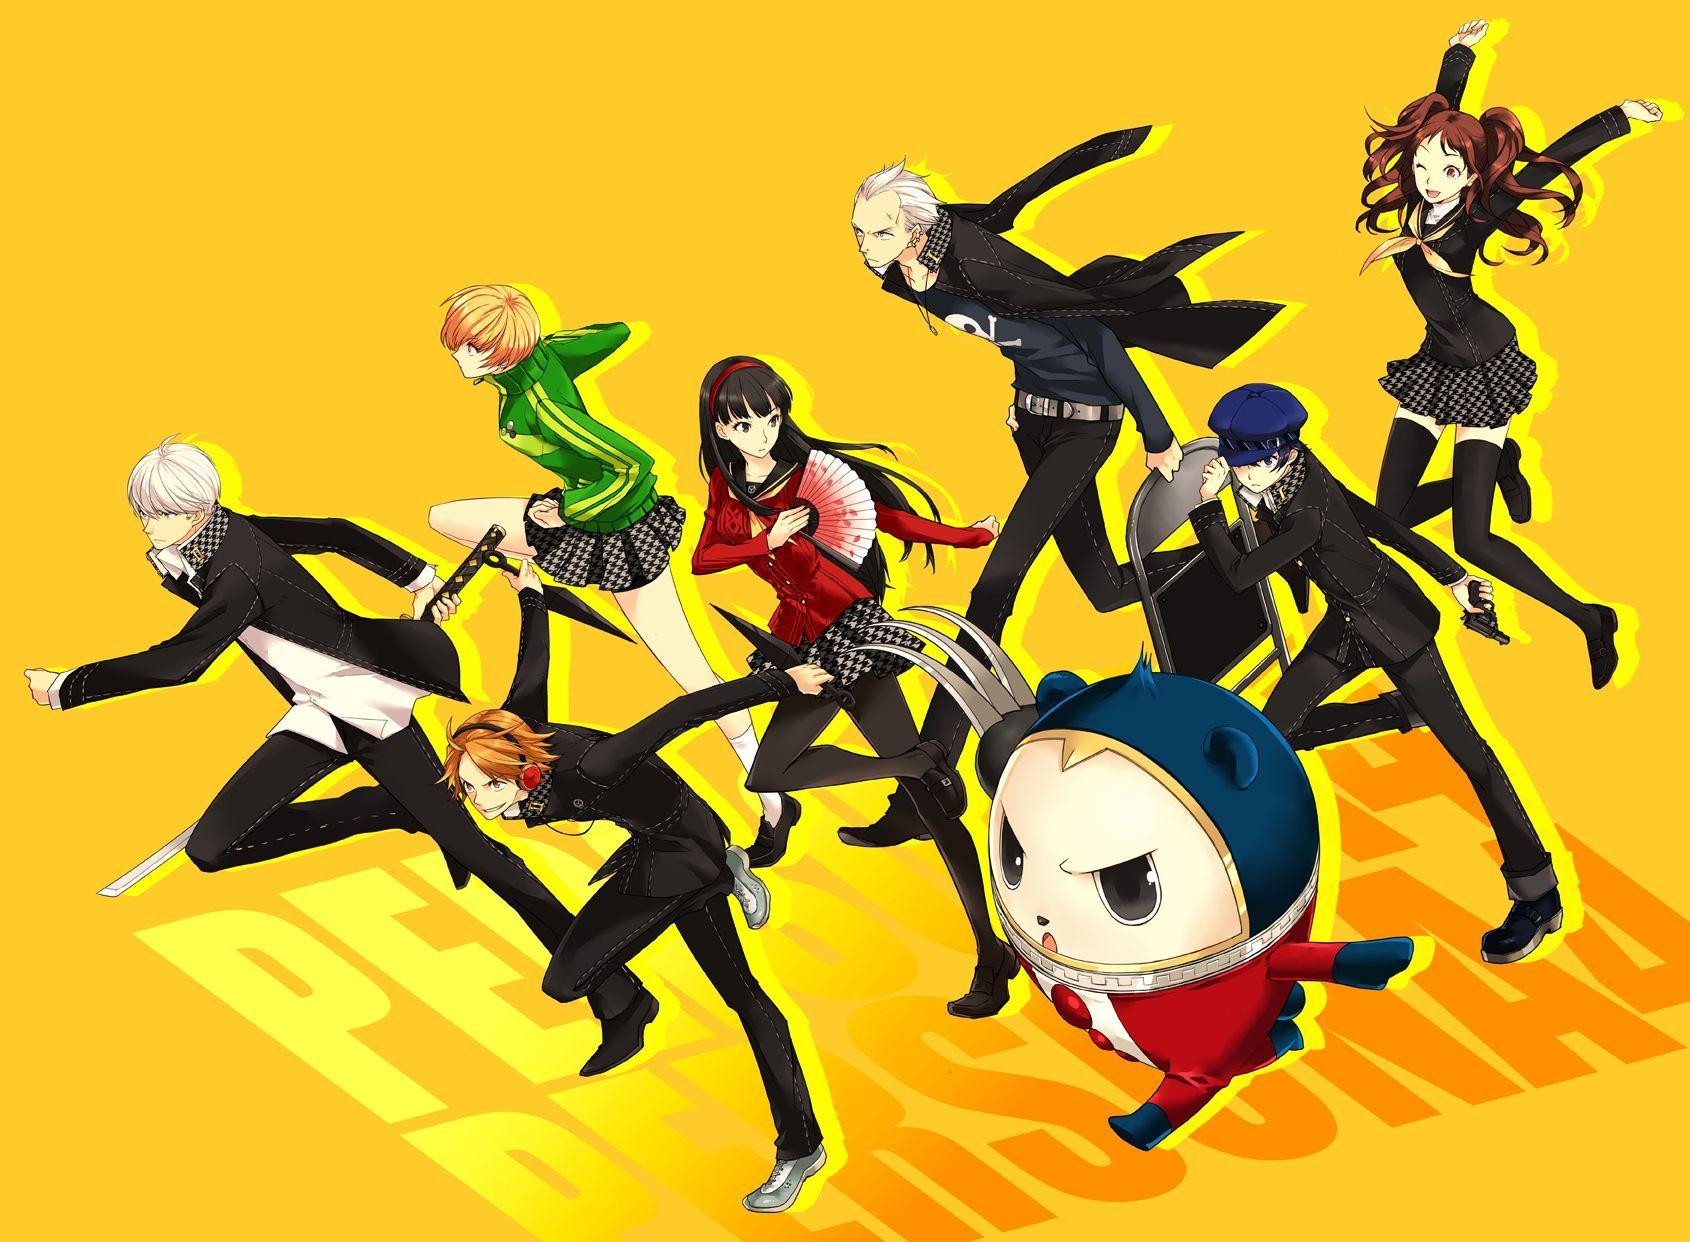 Persona wallpaper Persona allpapers. Persona 4 wallpaper, Persona Really cool drawings